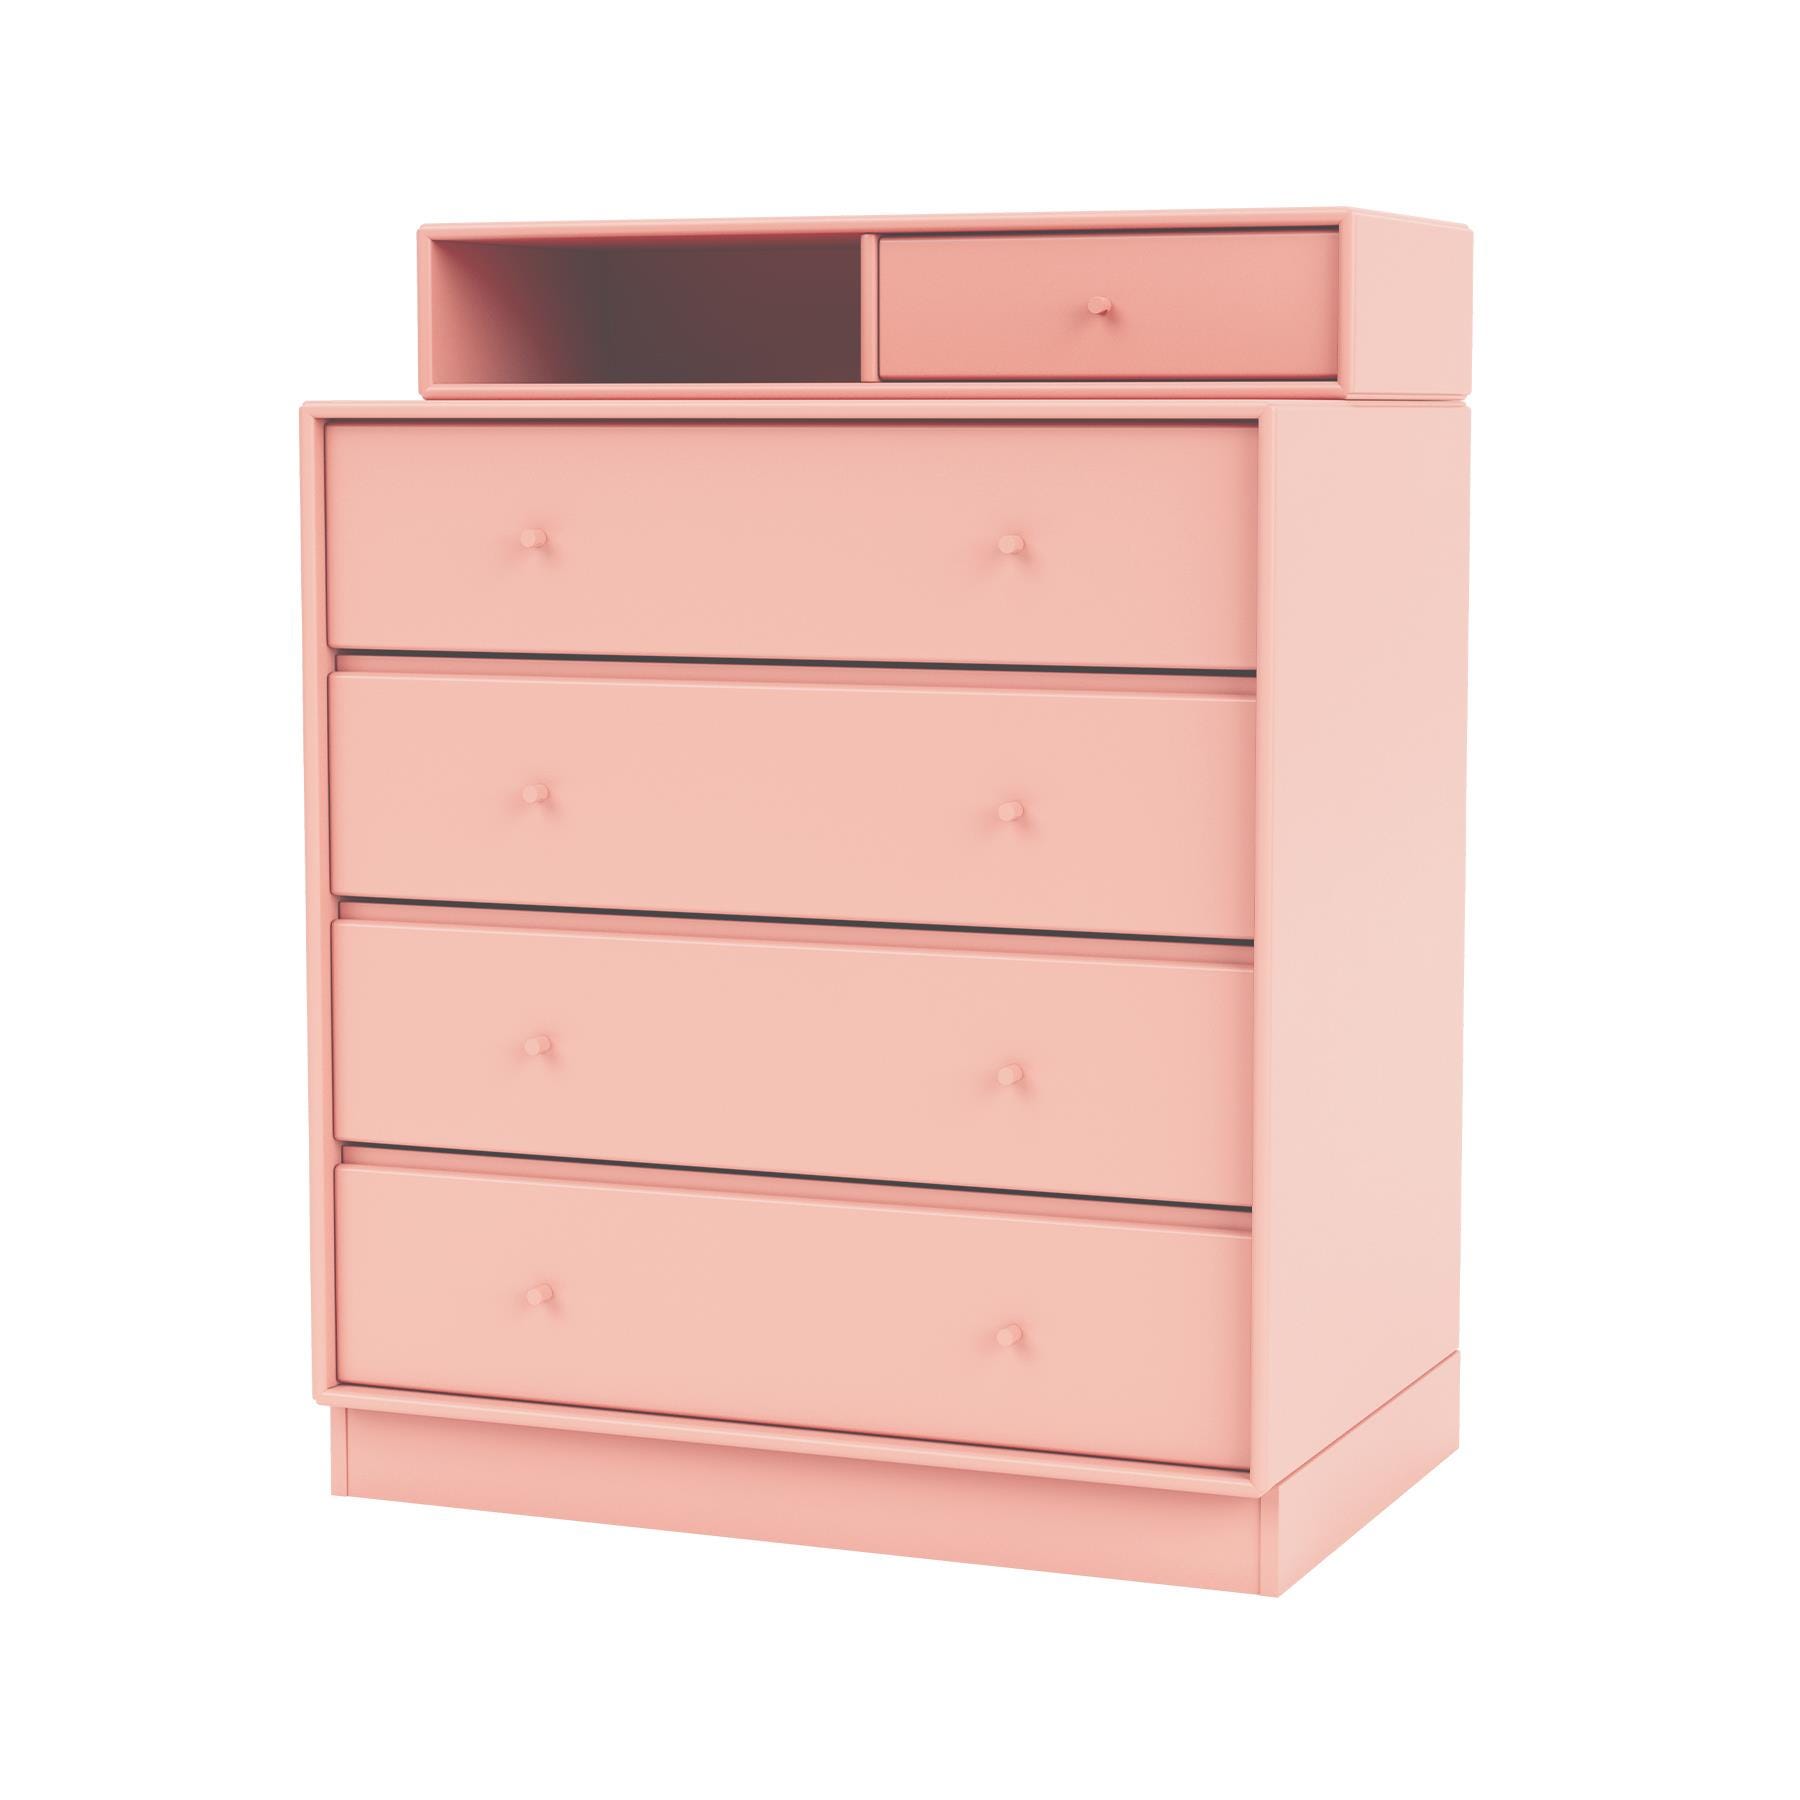 Montana Keep Chest Of Drawers Ruby Plinth Pink Designer Furniture From Holloways Of Ludlow